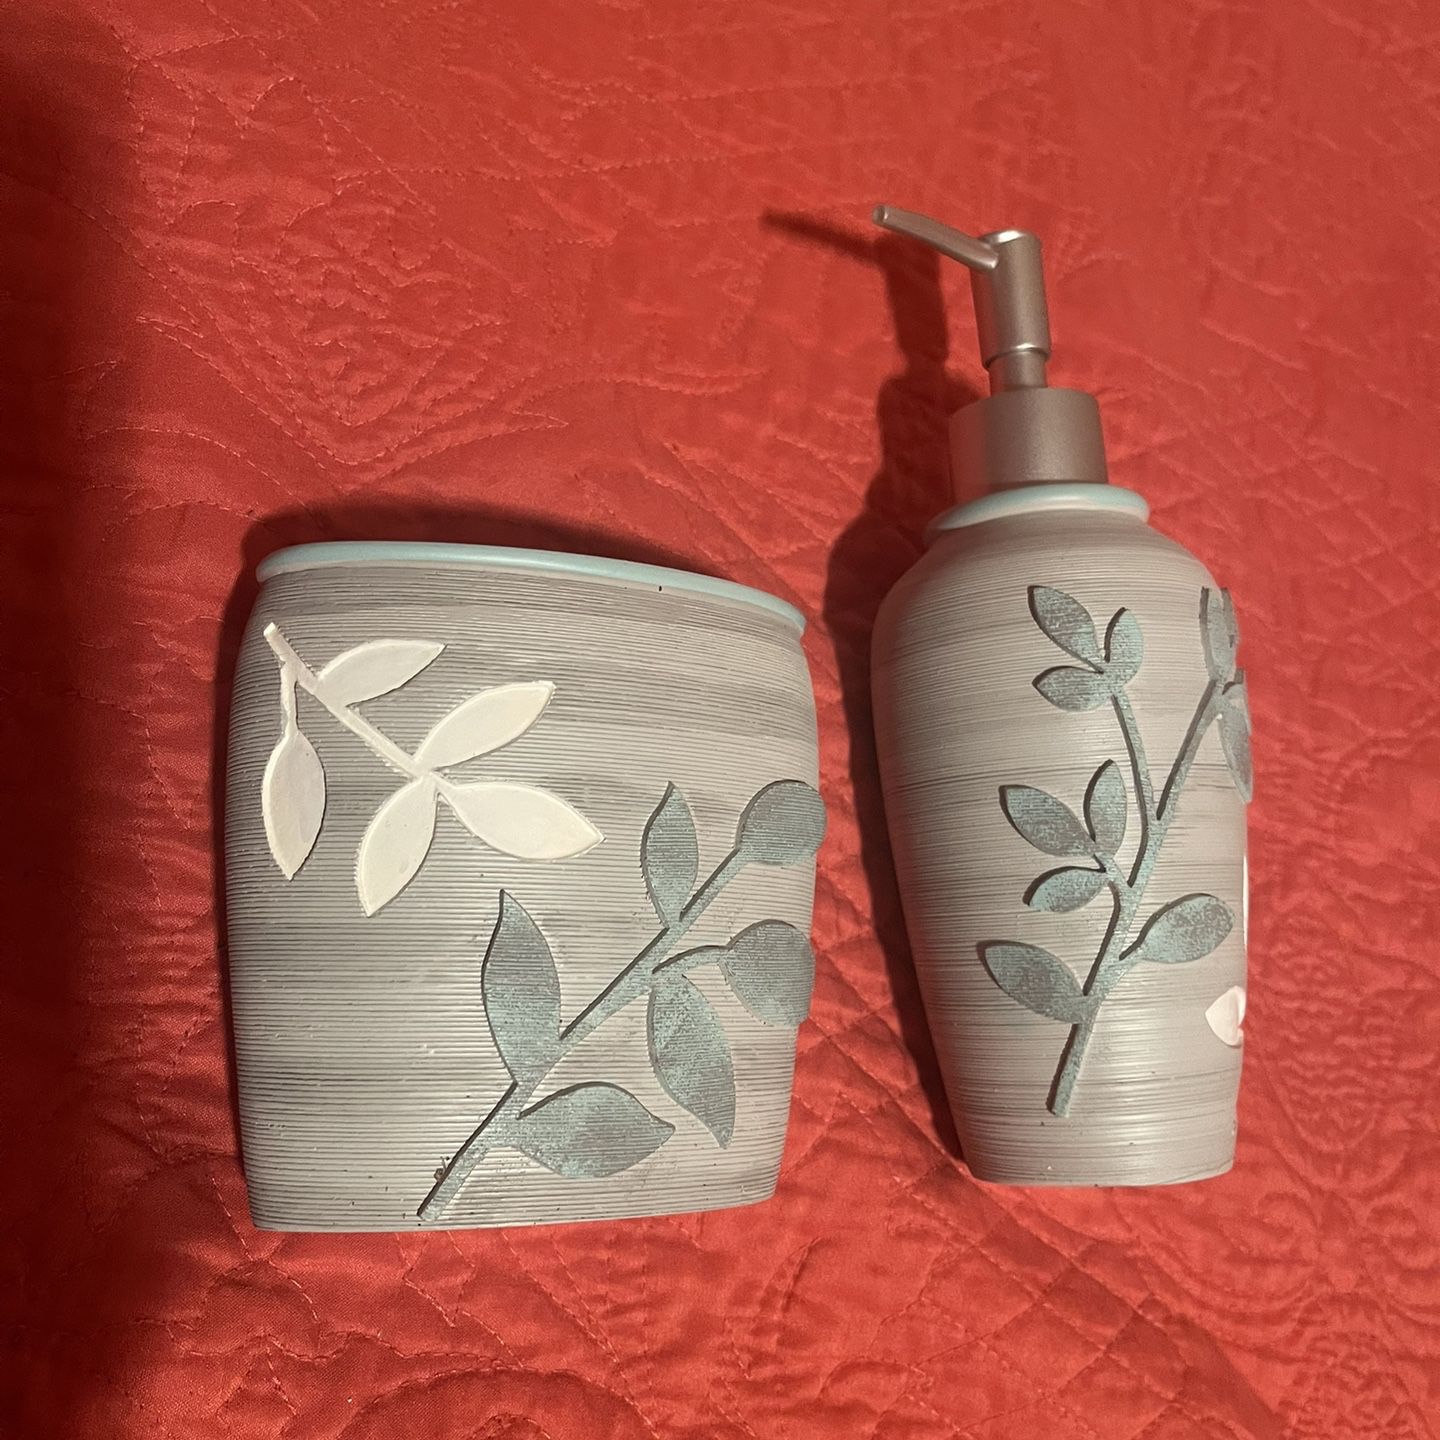 New Soap Dispenser Toothbrush Holder for Sale in San Antonio, TX - OfferUp